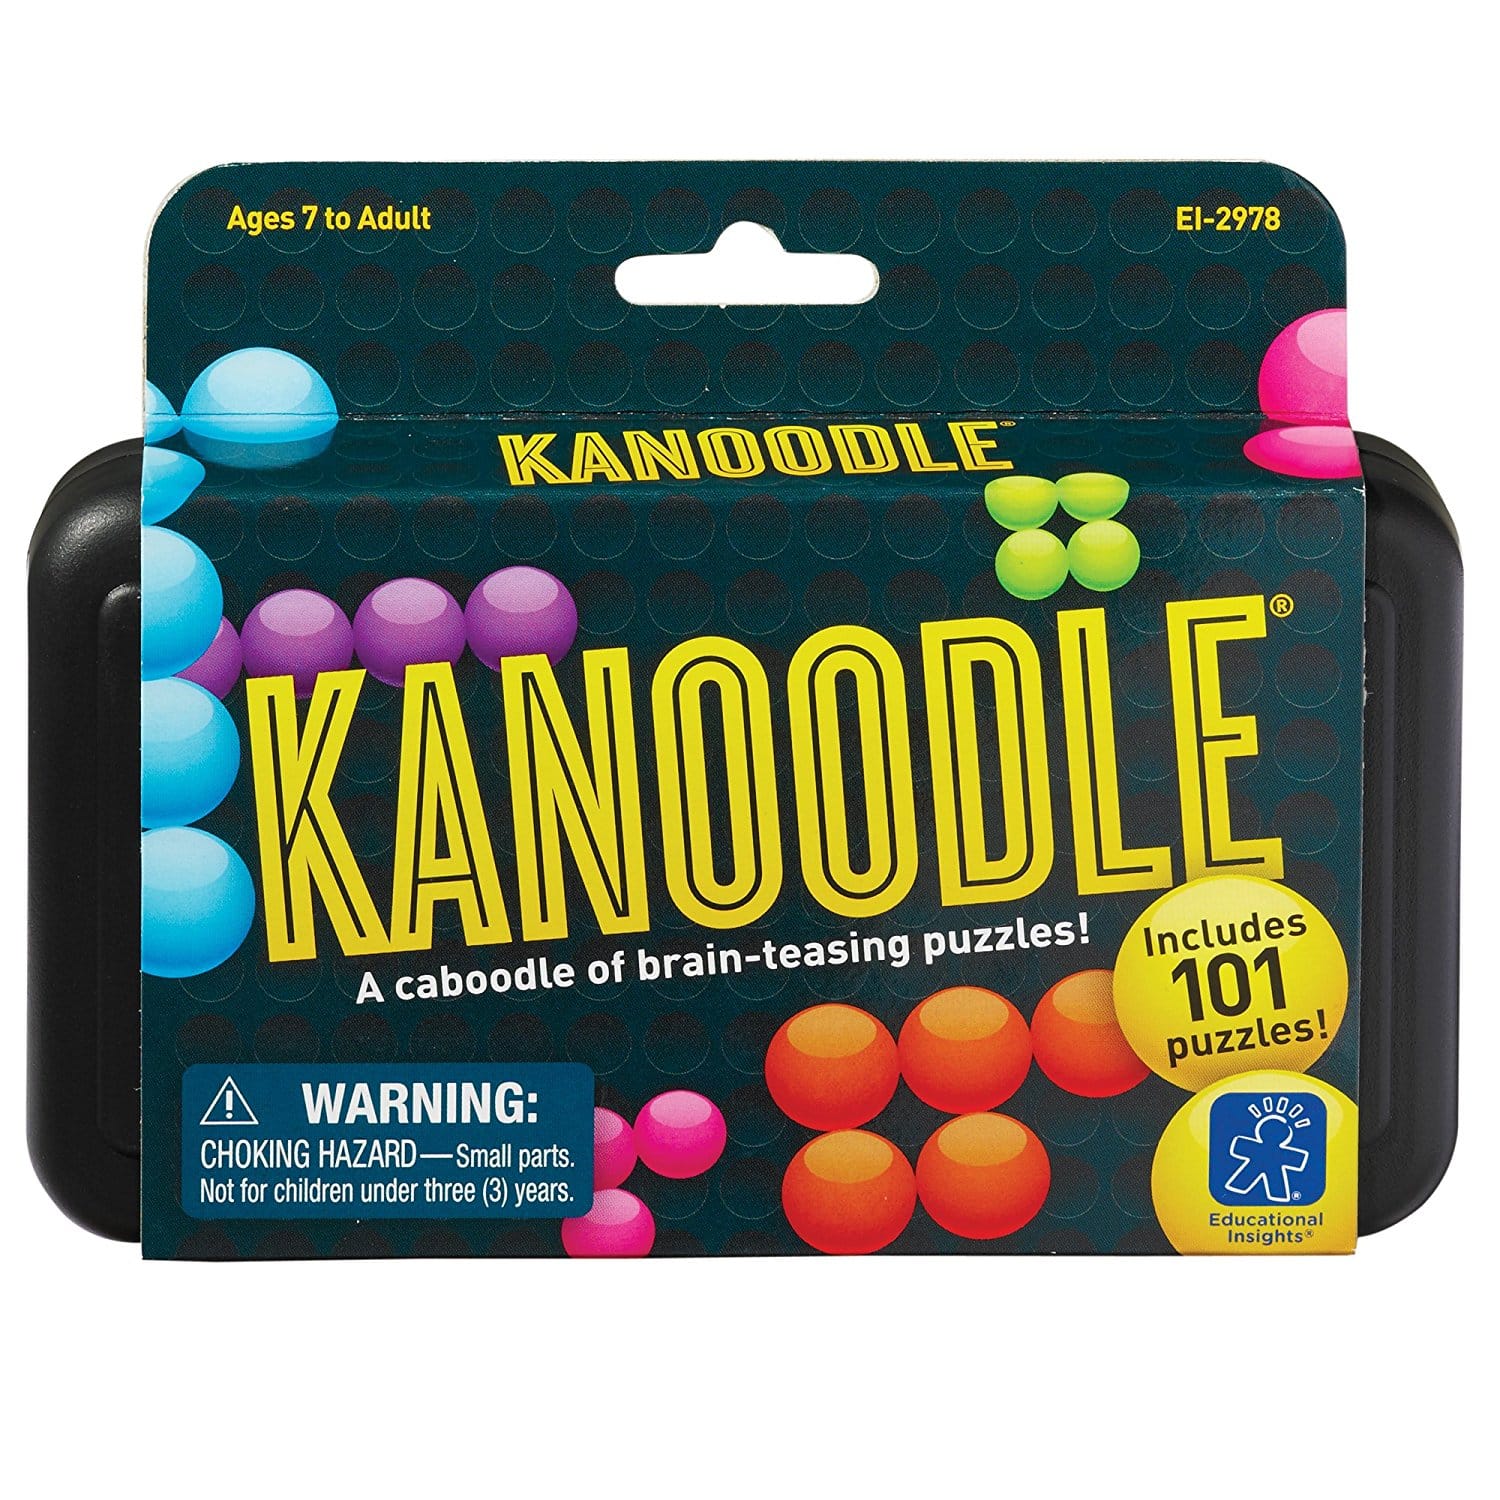 DEAL ALERT: Kanoodle 1 Person Game -32% off!